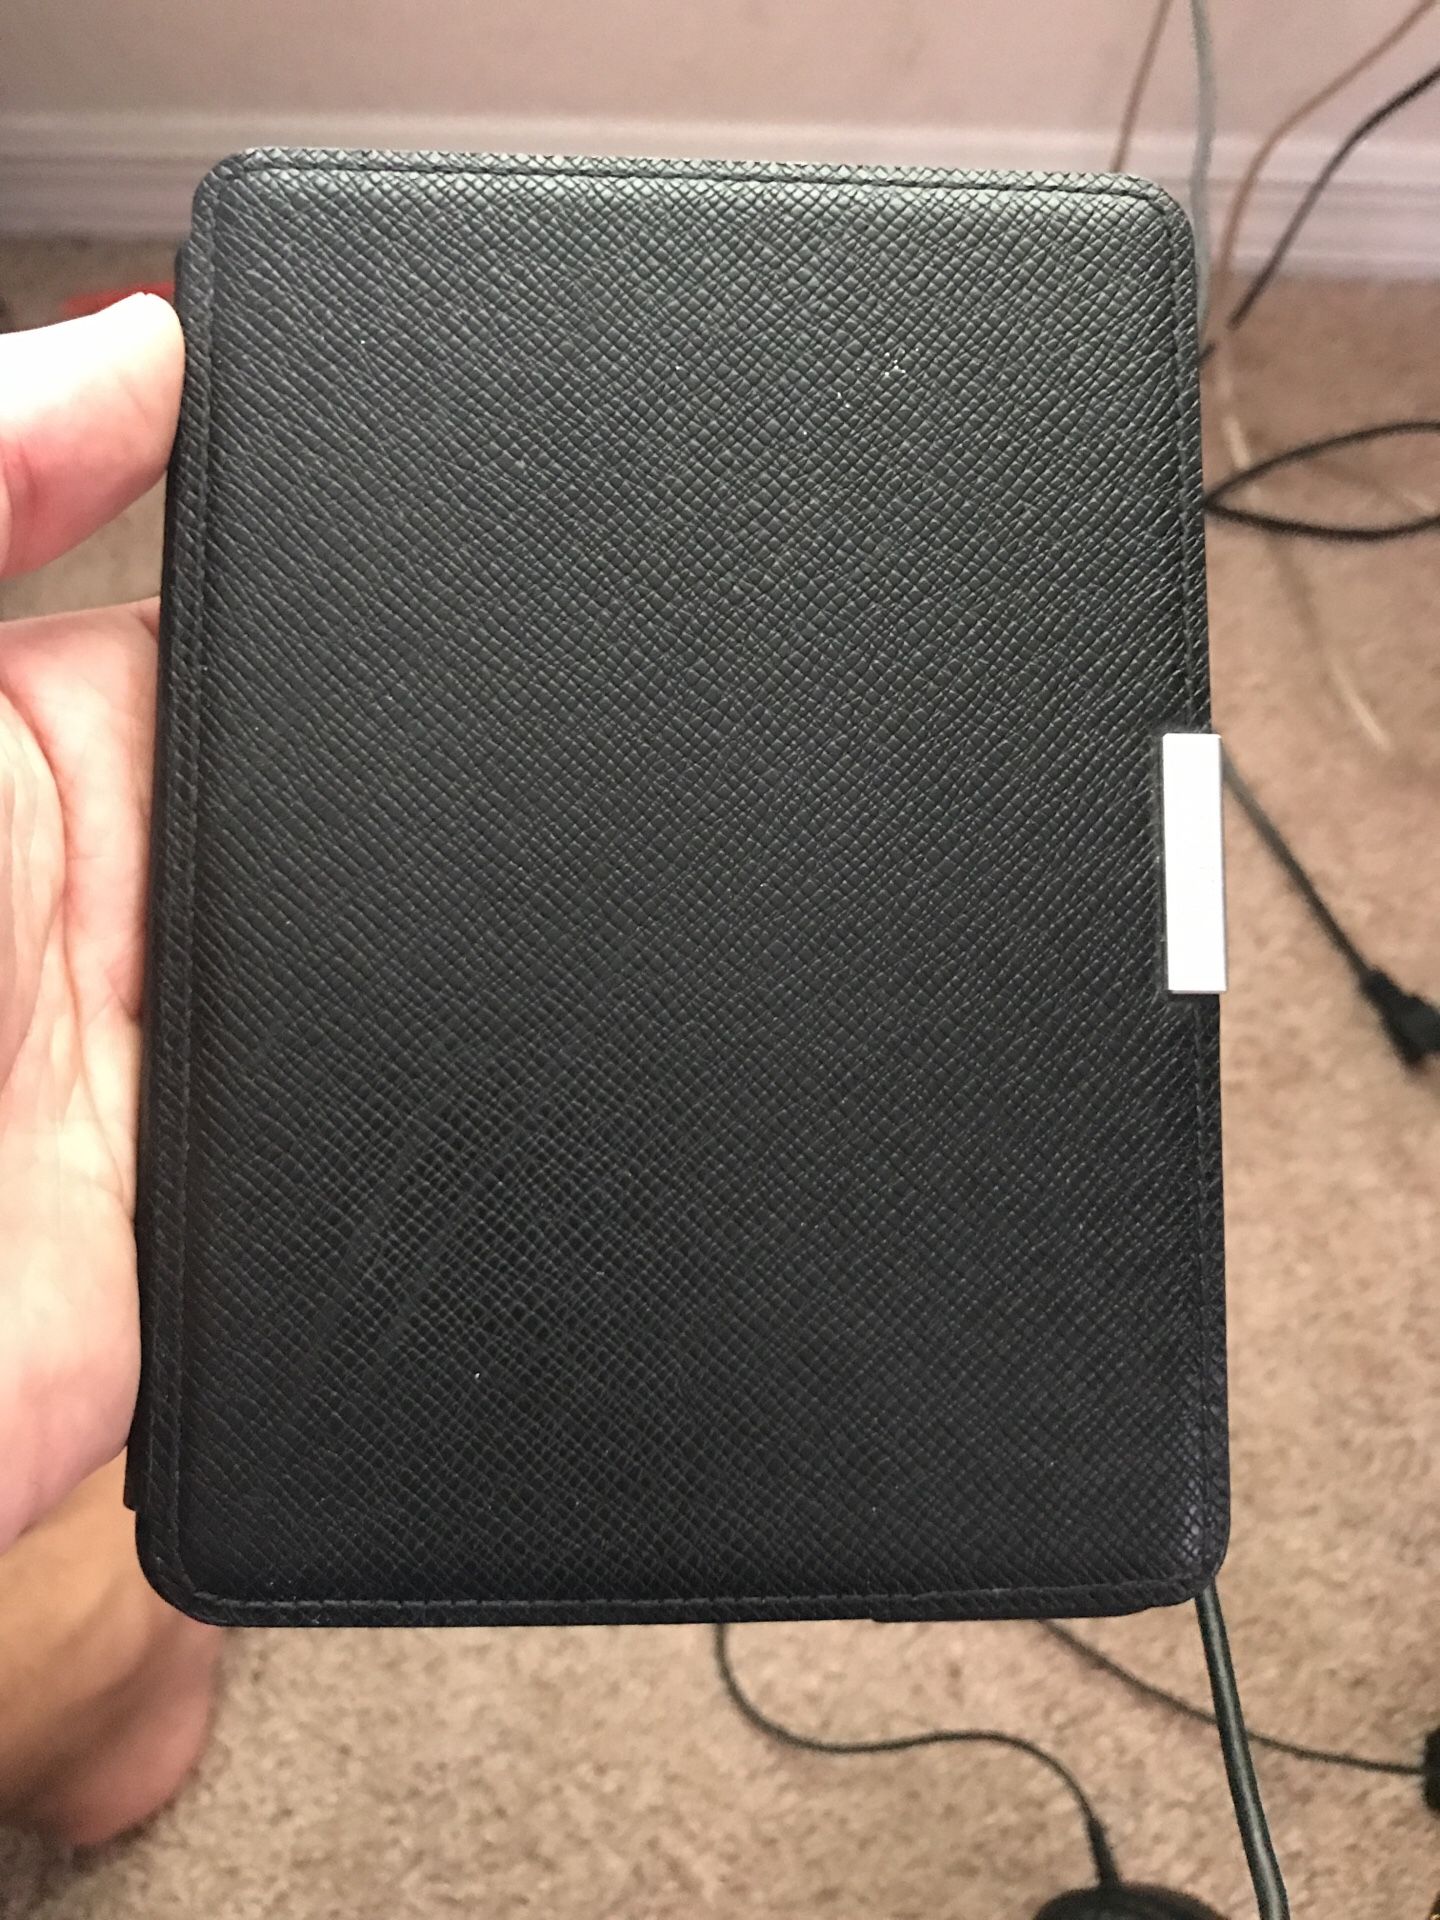 Kindle Paper-white 2nd Gen w/ cover